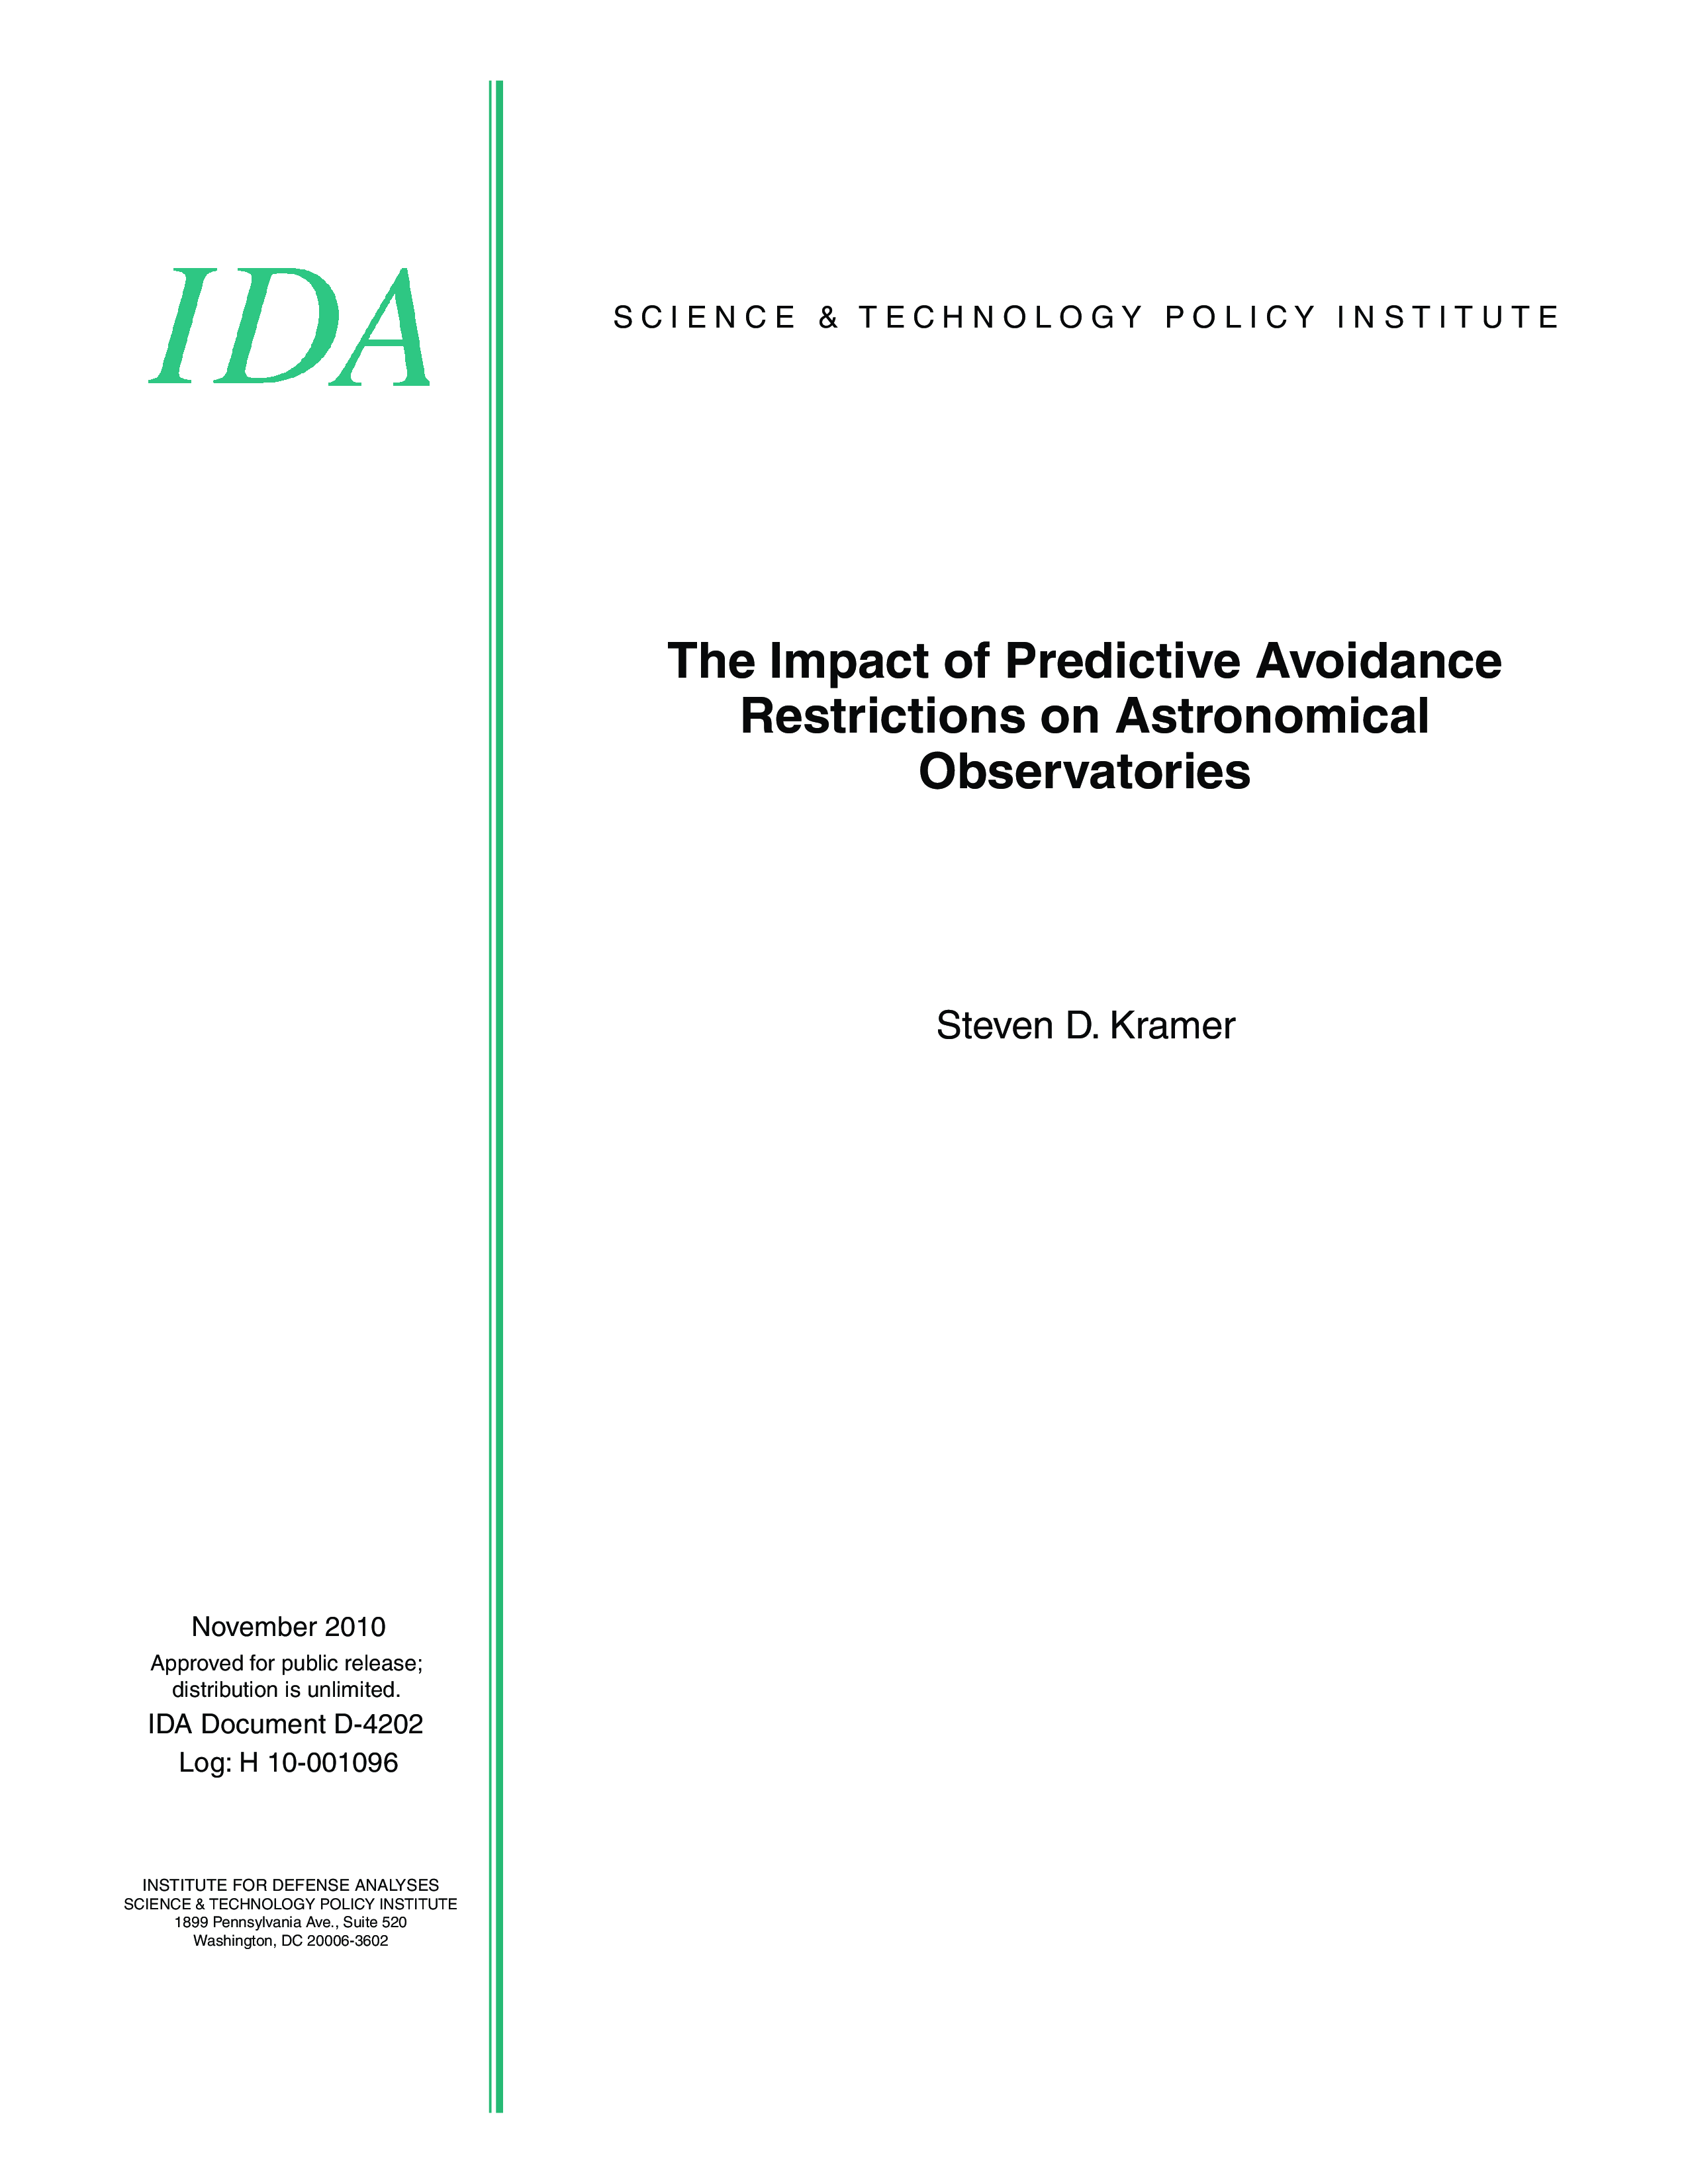 The Impact of Predictive Avoidance Restrictions on Astronomical Observatories